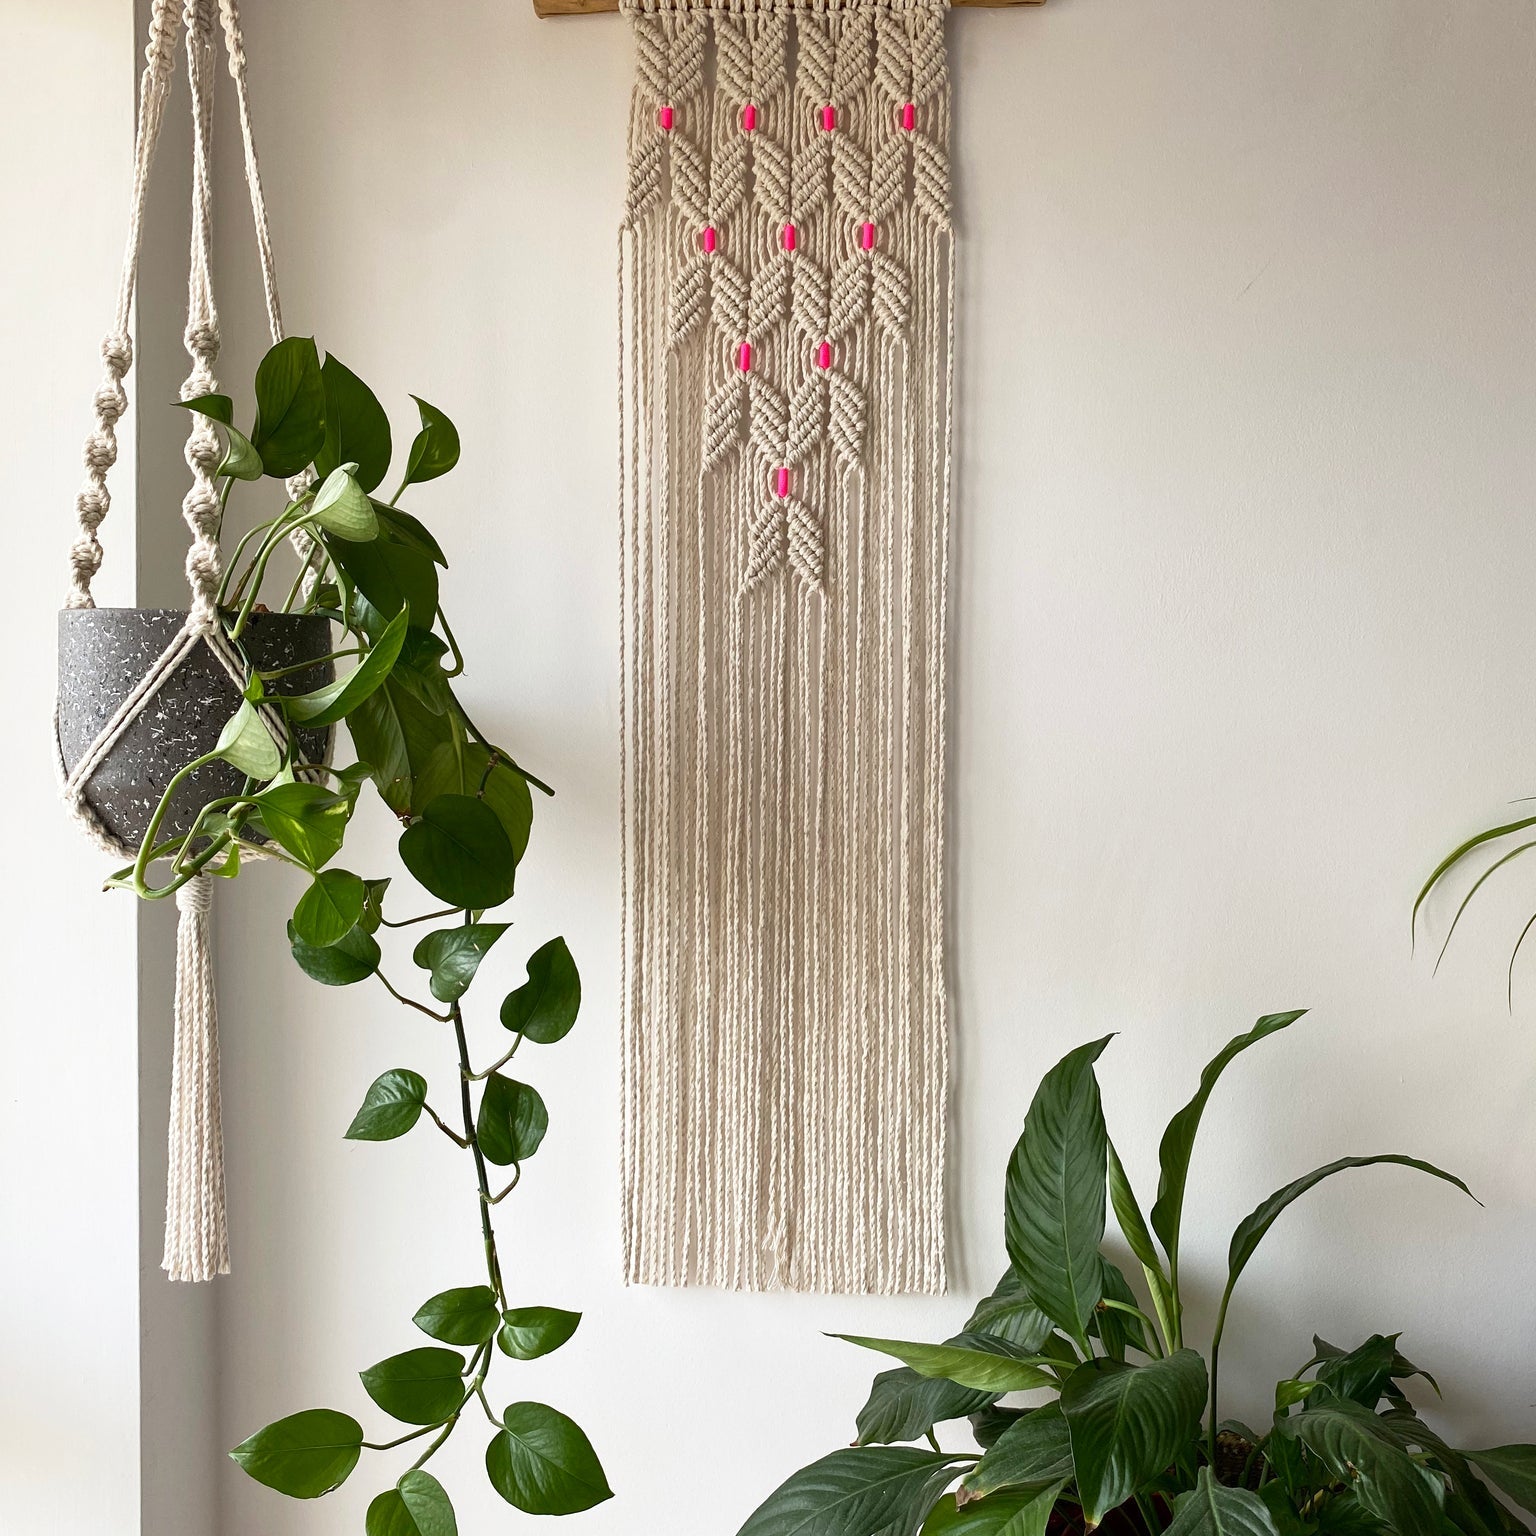 Kalicrame Natural Wall Hanging with Pink Neon Accent